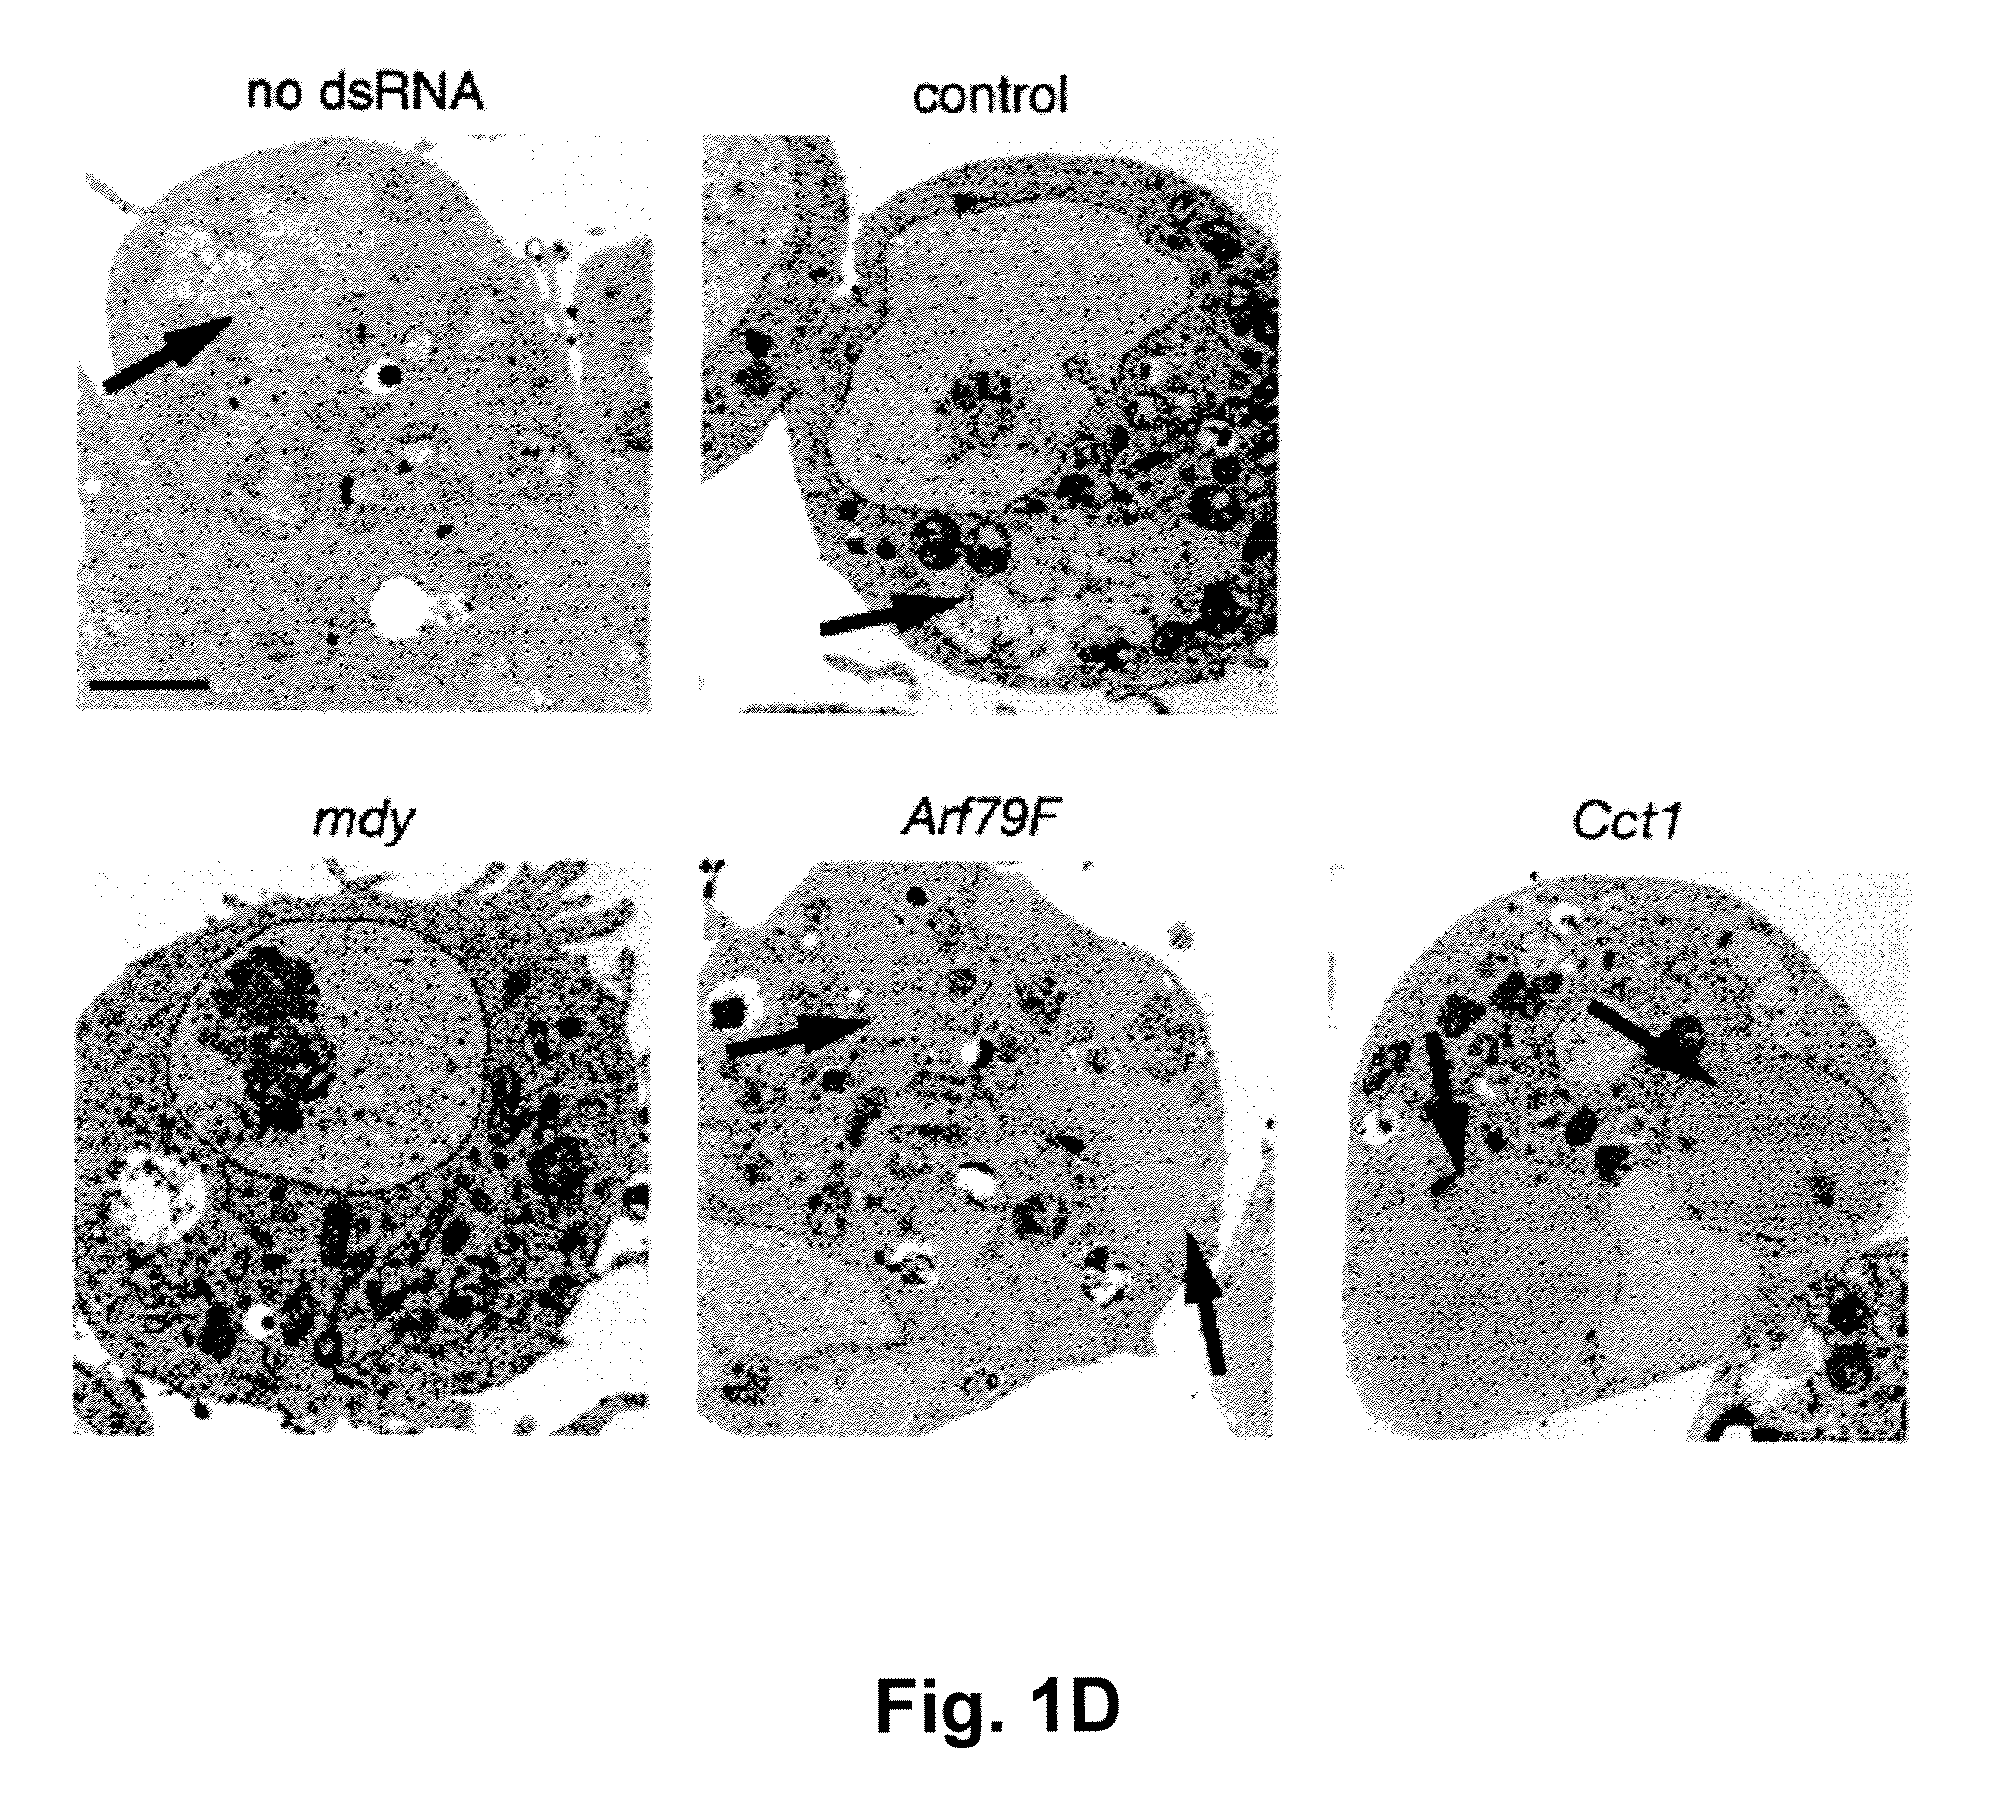 Methods of Modulating Lipid Concentrations in Eukaryotic Cells